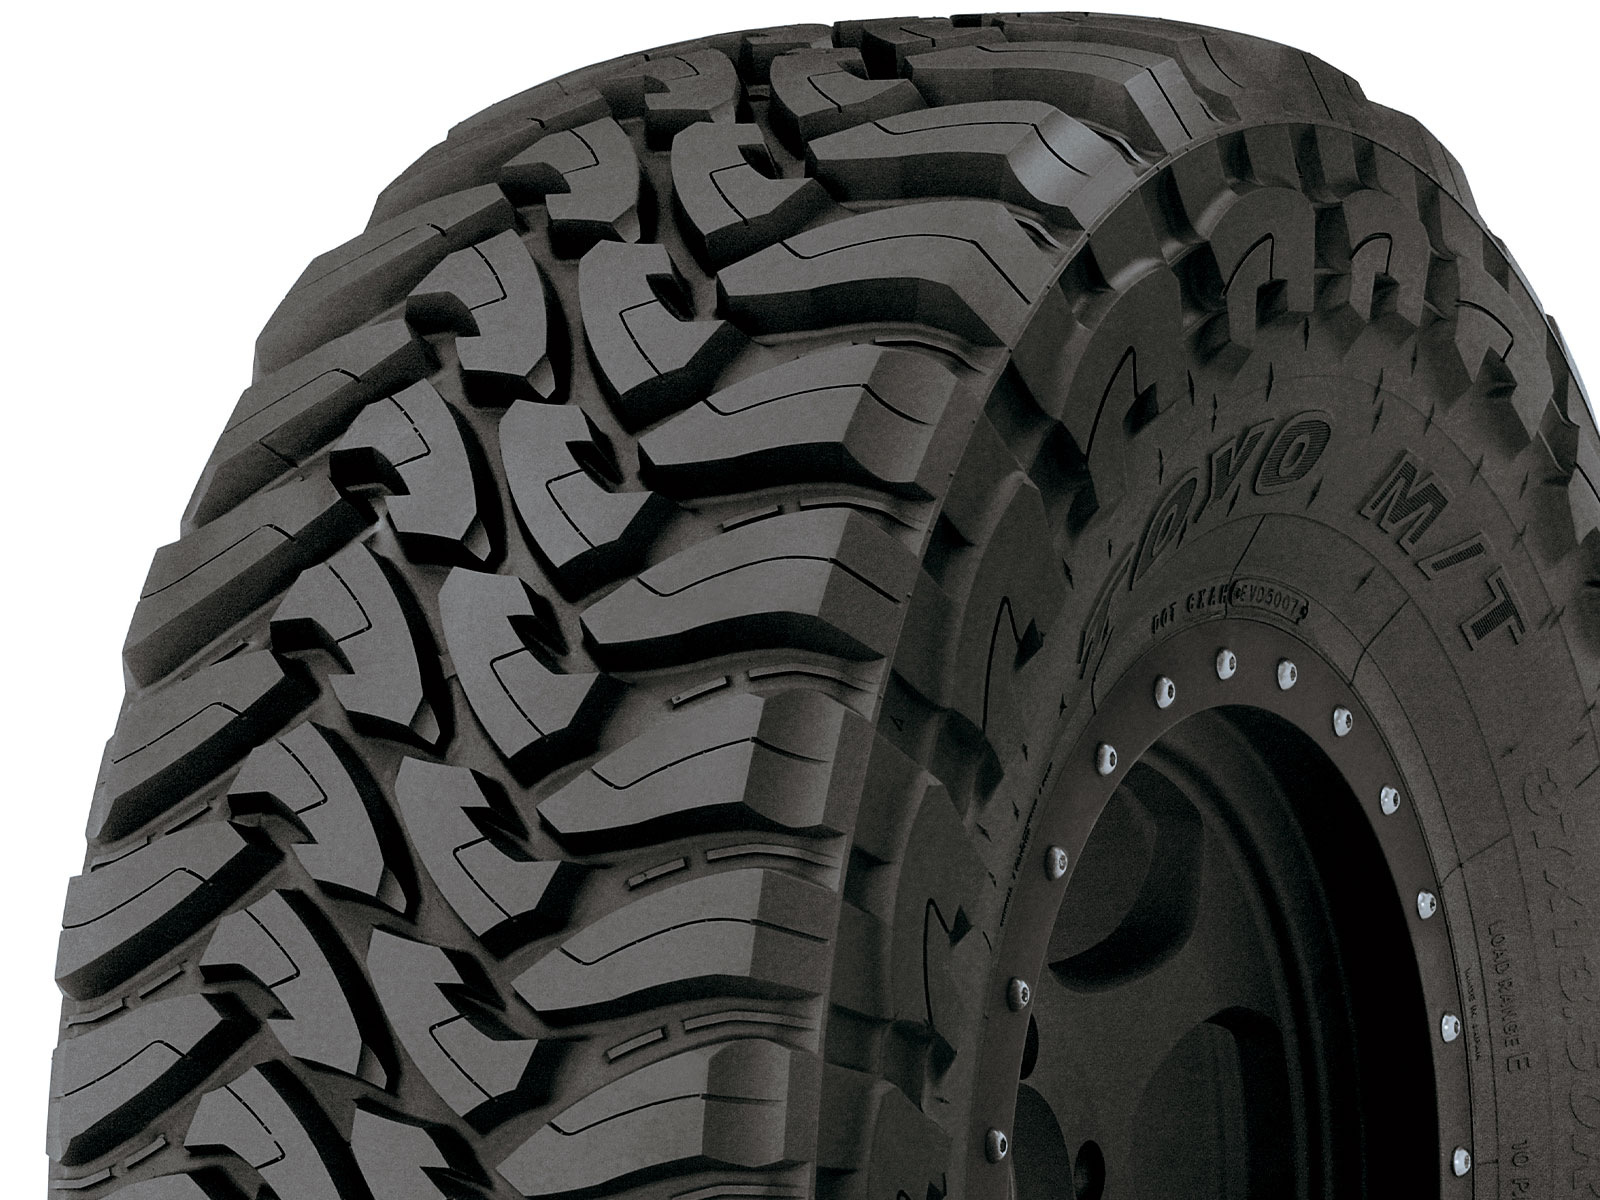 TOYO TIRES Open Country M/T Tires